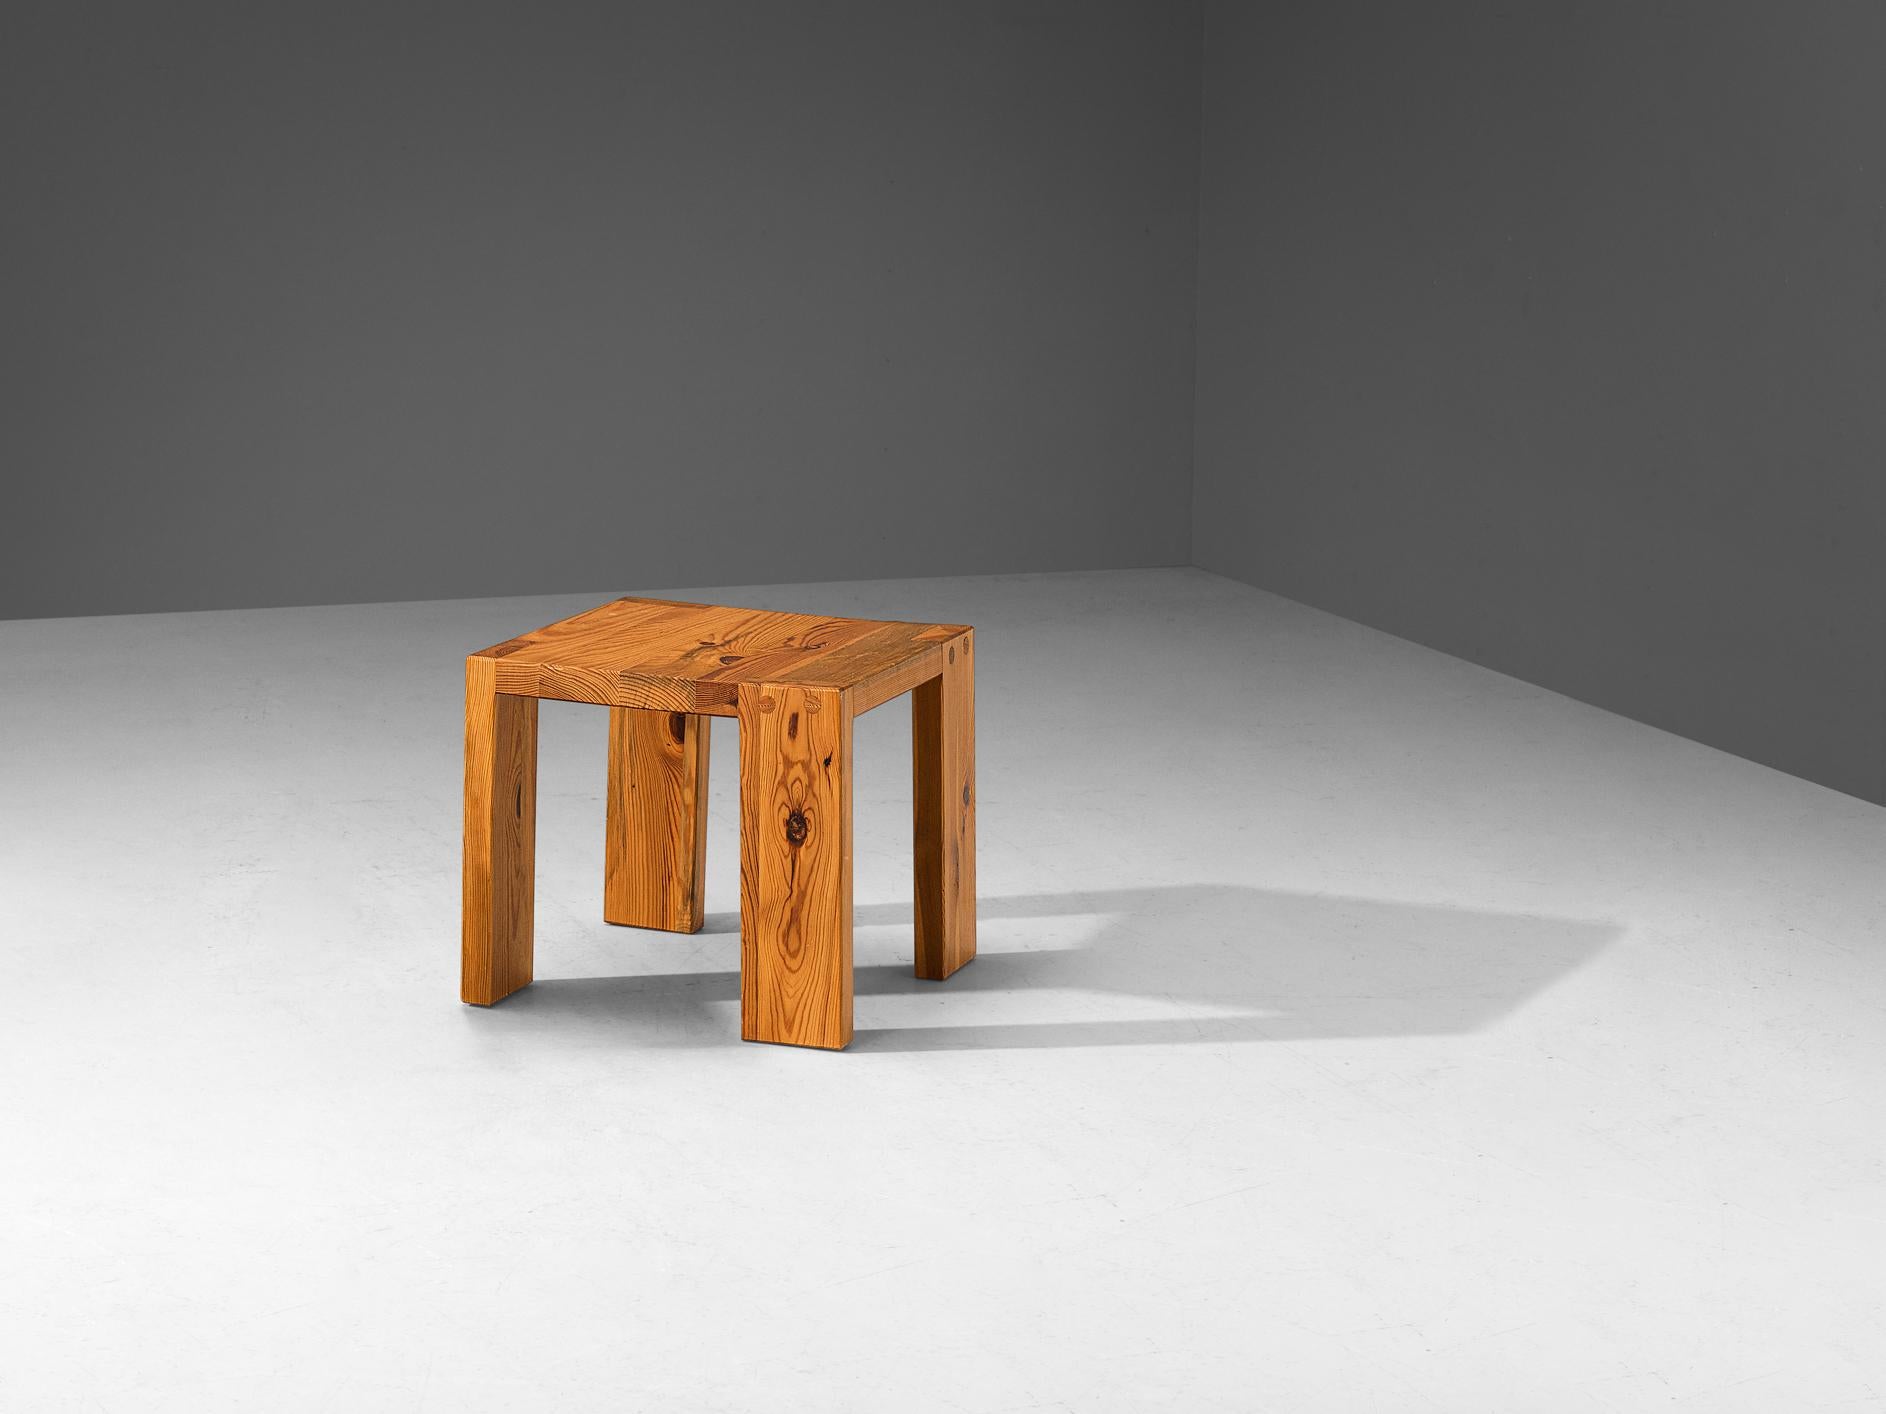 Sven Larsson, side table, pine, Sweden, 1970s.

A cubist side table designed by Swedish designer Sven Larsson. Distinctive for his work is the use of solid pine wood and the refined joinery that shows his true craftsmanship. Especially the double